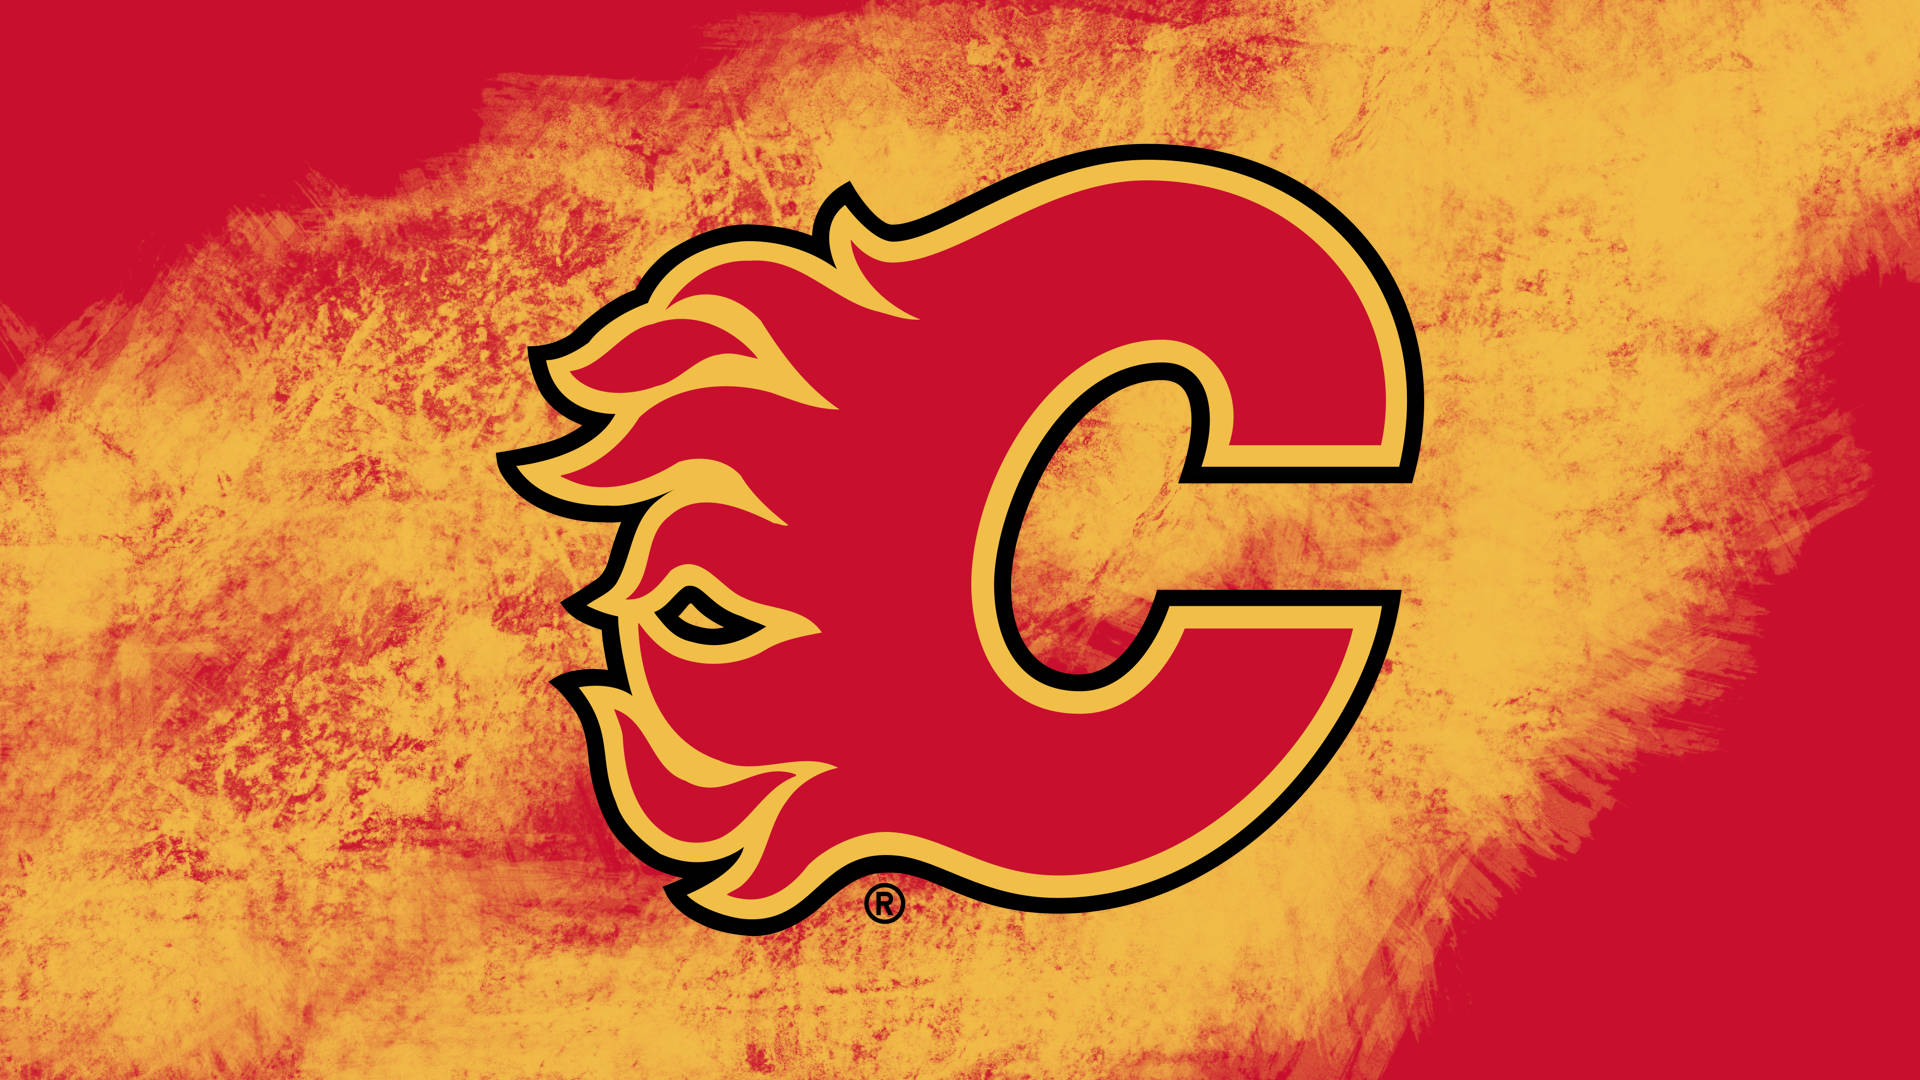 Download Calgary Flames Logo In Abstract Yellow Wallpaper